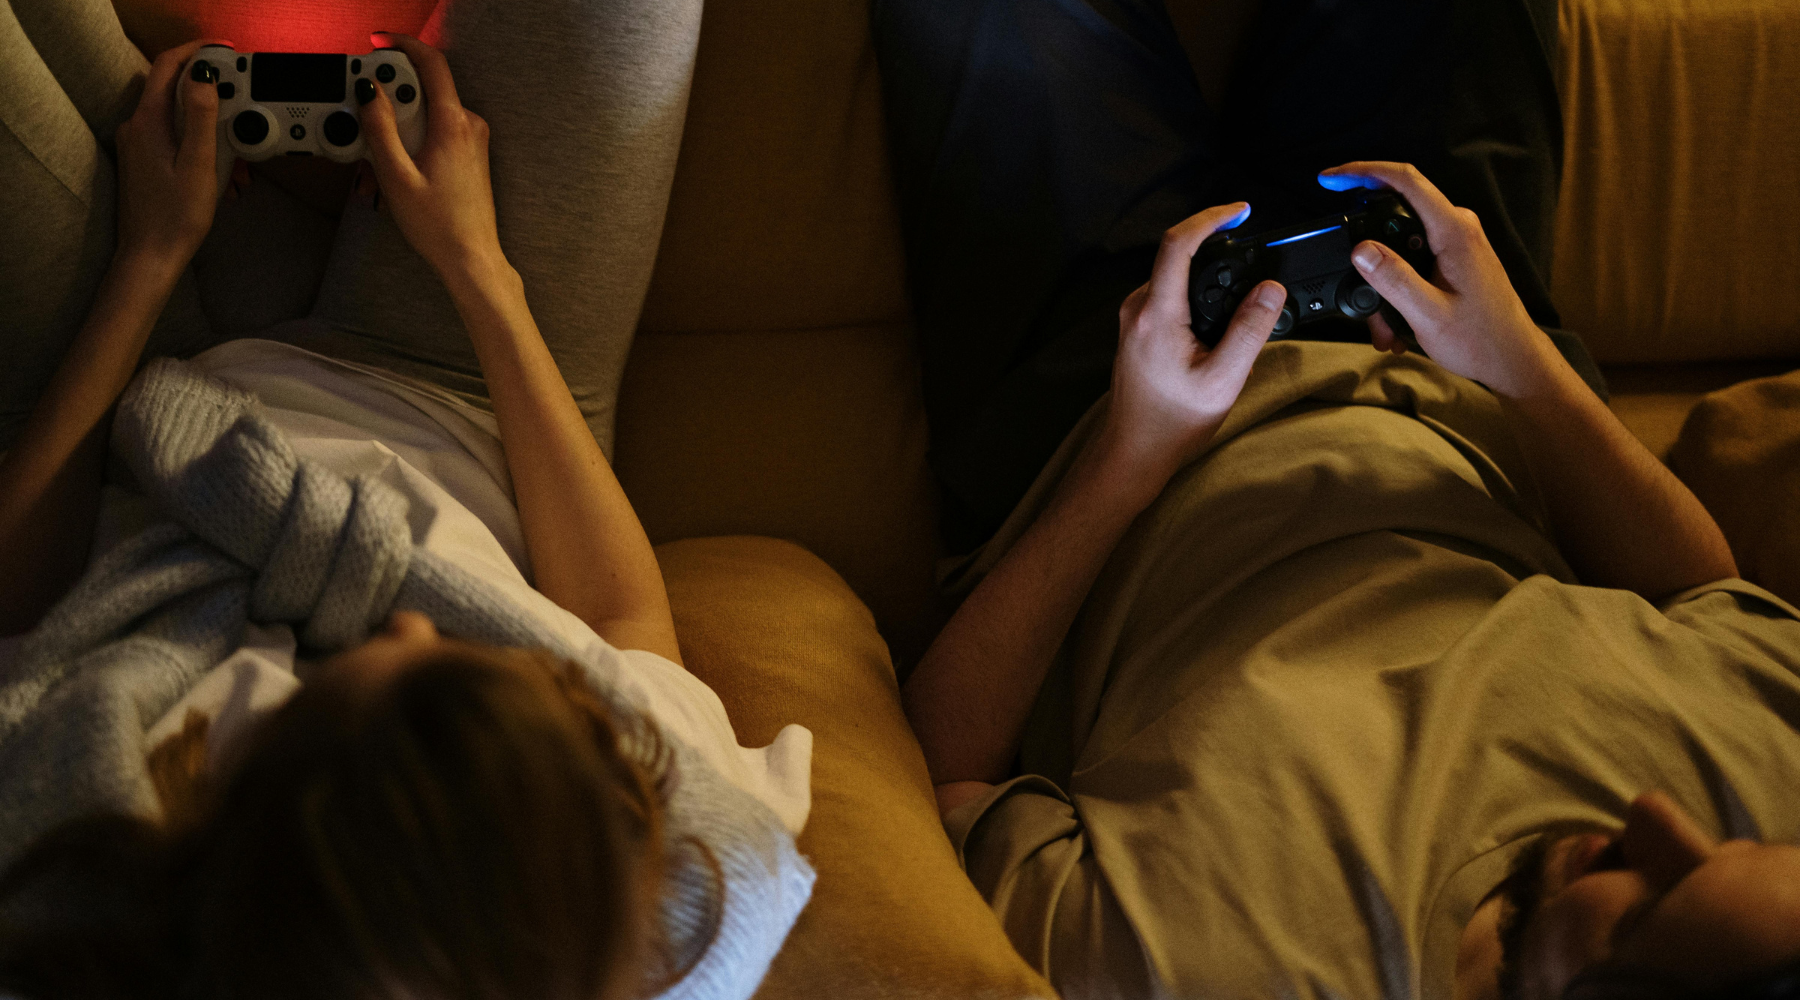 Gaming Negatively Affects Gamers in the UAE More Than the Global Public